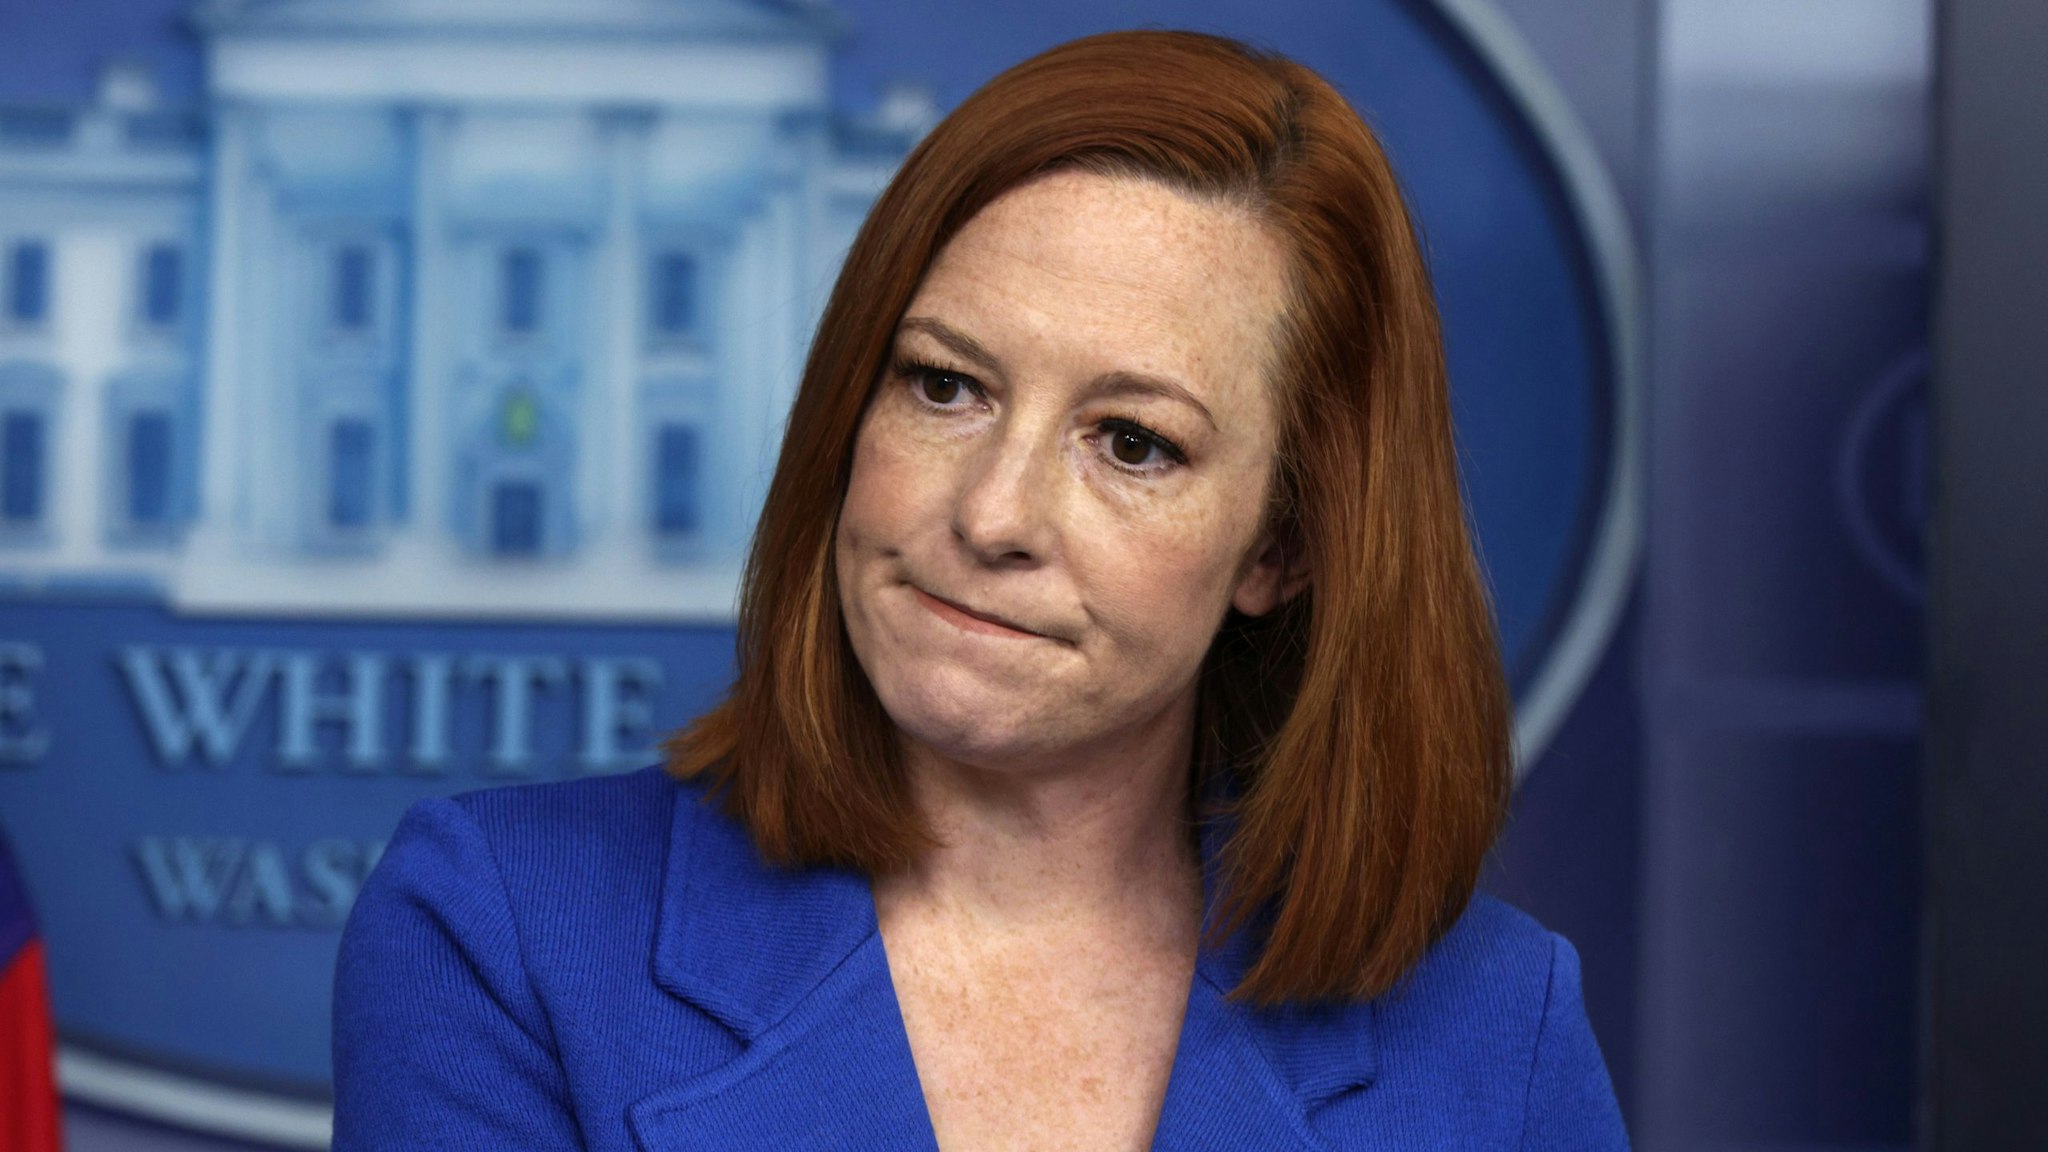 WASHINGTON, DC - APRIL 19: White House Press Secretary Jen Psaki participates in a daily press briefing at the James Brady Press Briefing Room of the White House April 19, 2021 in Washington, DC. Psaki held the briefing to answer questions from members of the press.